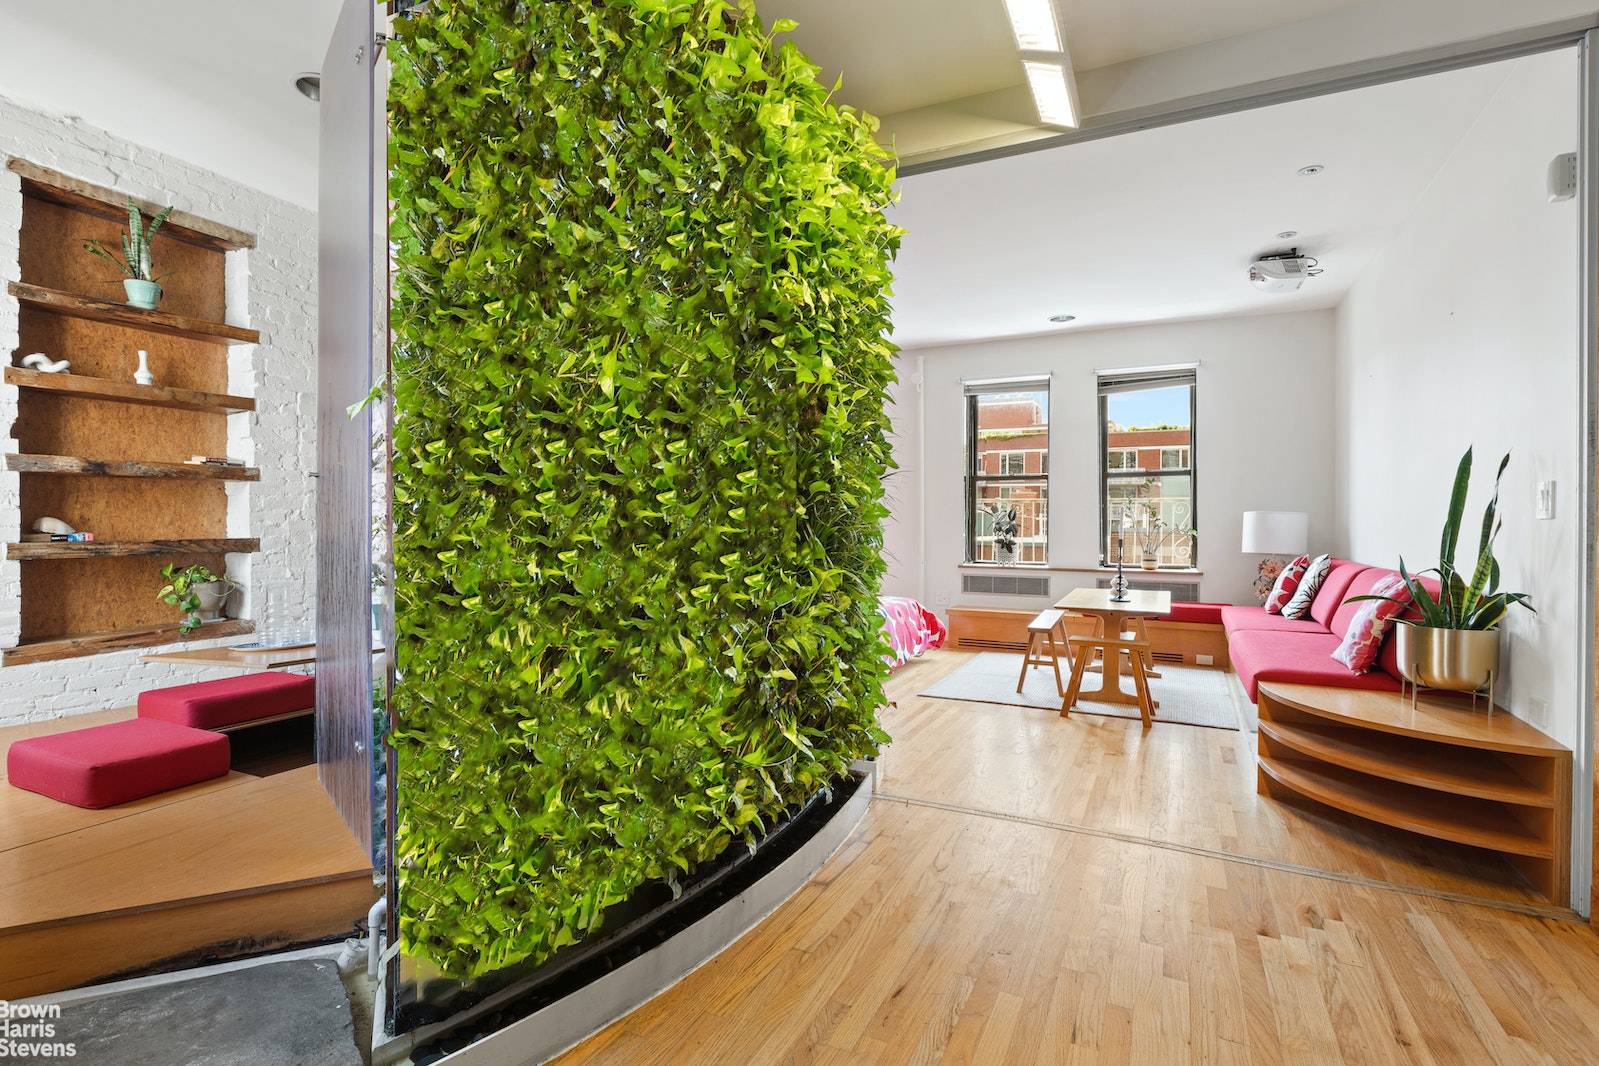 Welcome to your new eco friendly media darling oasis in the East Village !